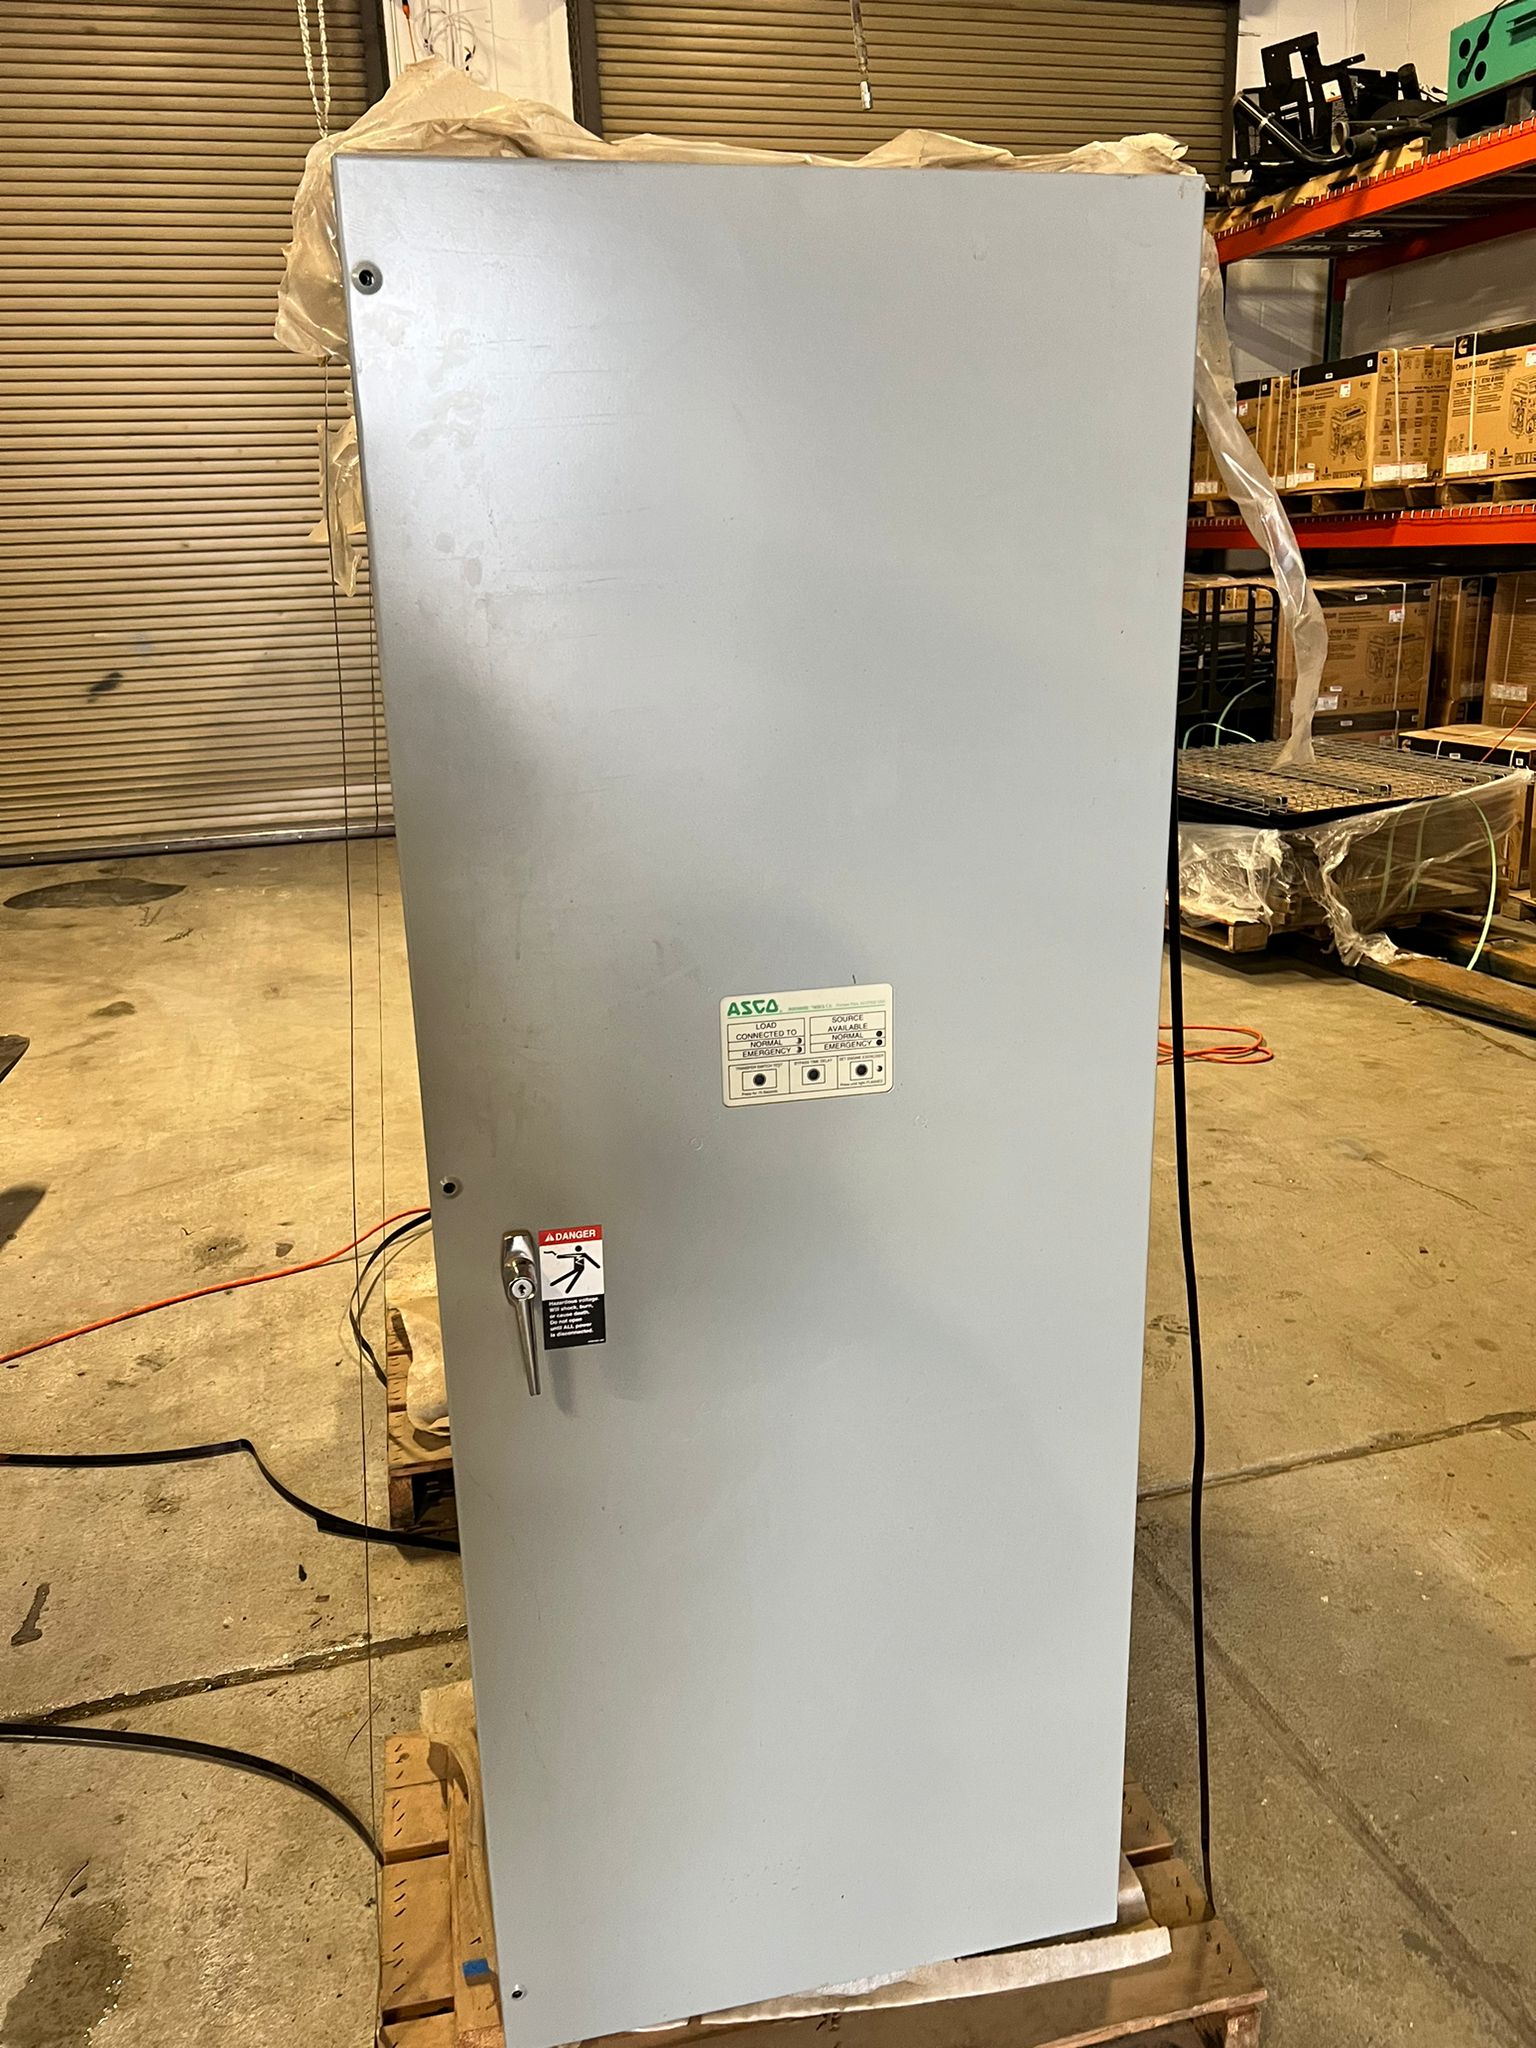 600 Amp ASCO Series 300 Automatic Transfer Switch – SALE PENDING